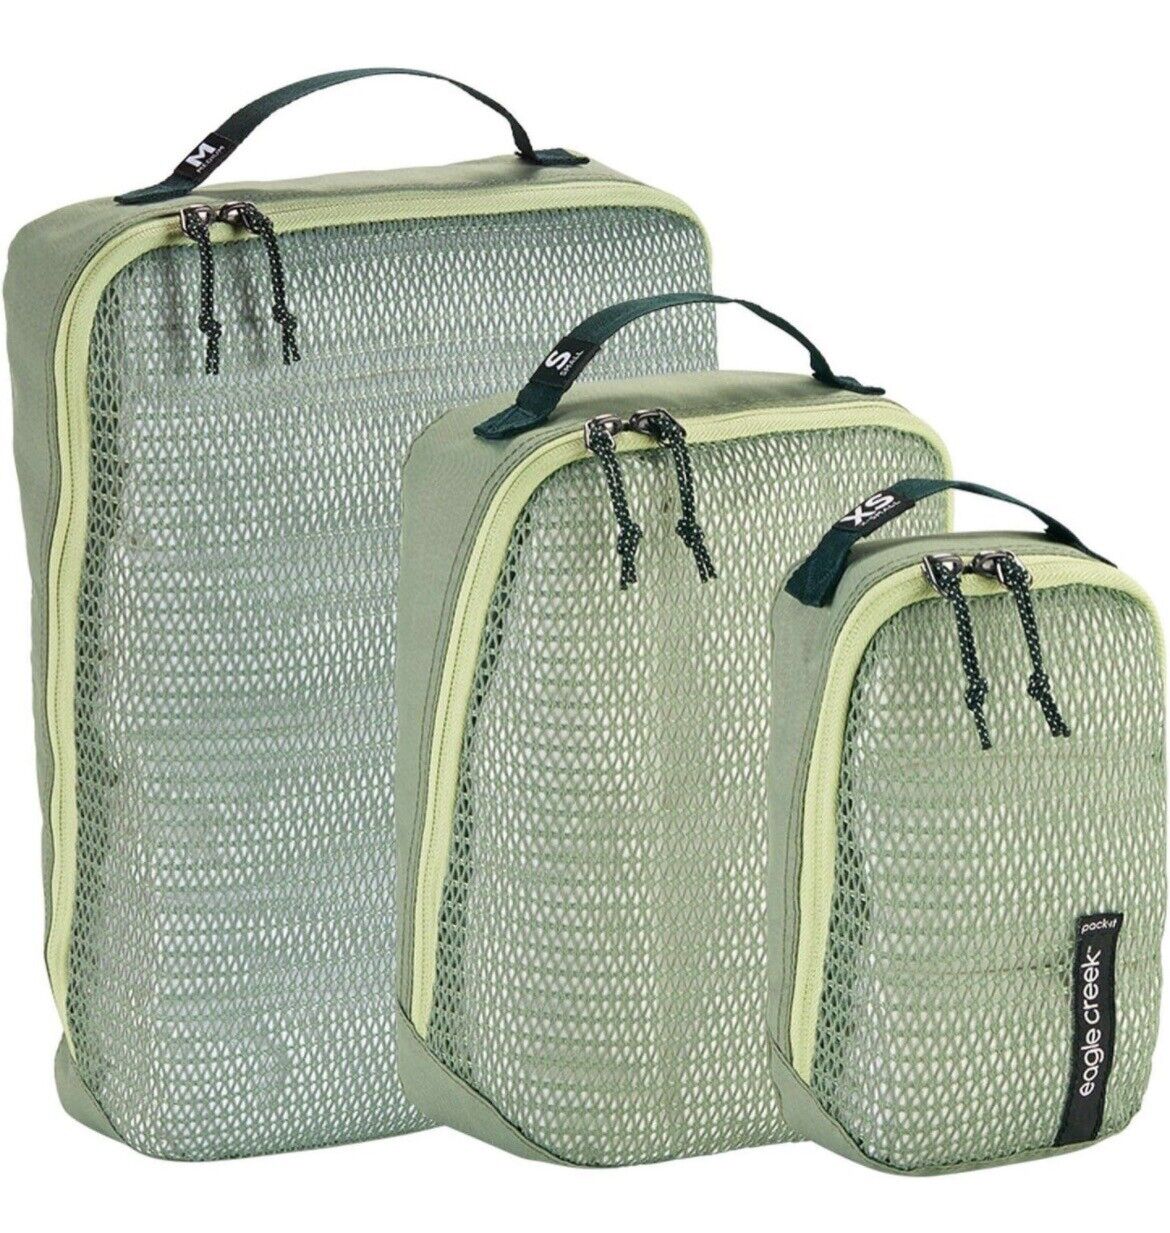 New-Eagle Creek Pack-It Reveal Mossy Green Set Of 3 Xs/S/M Packing Organizers